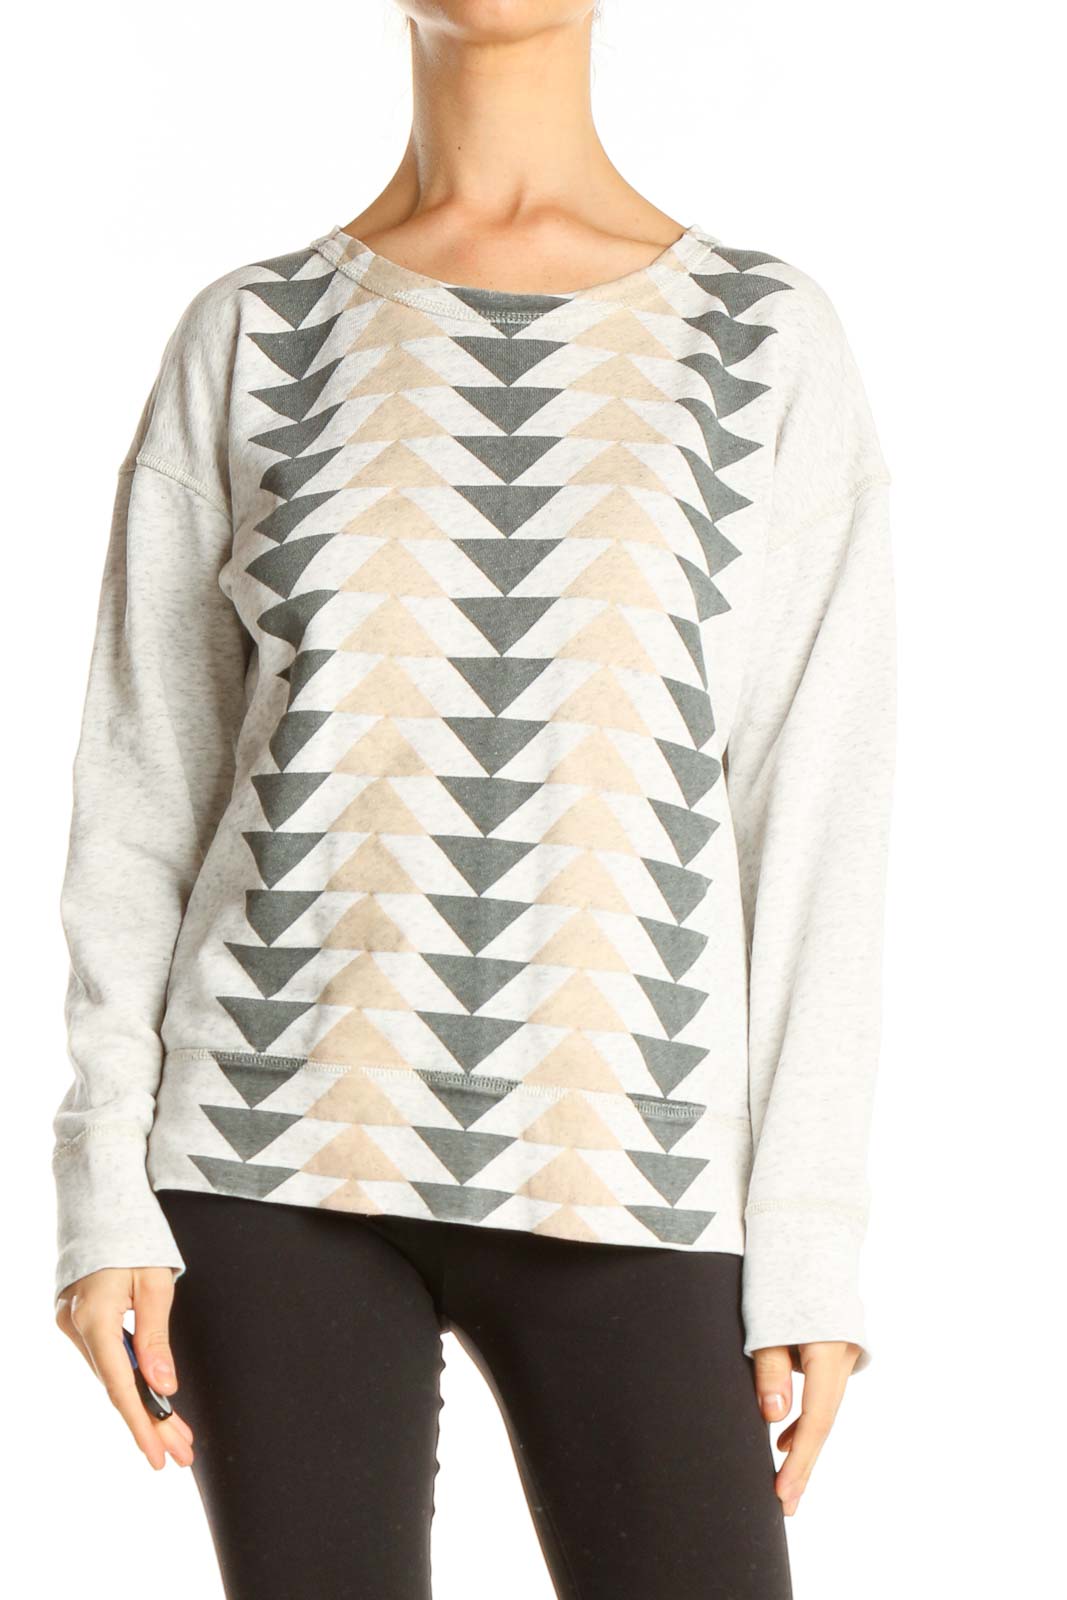 Gray Triangle Print All Day Wear Sweater Front